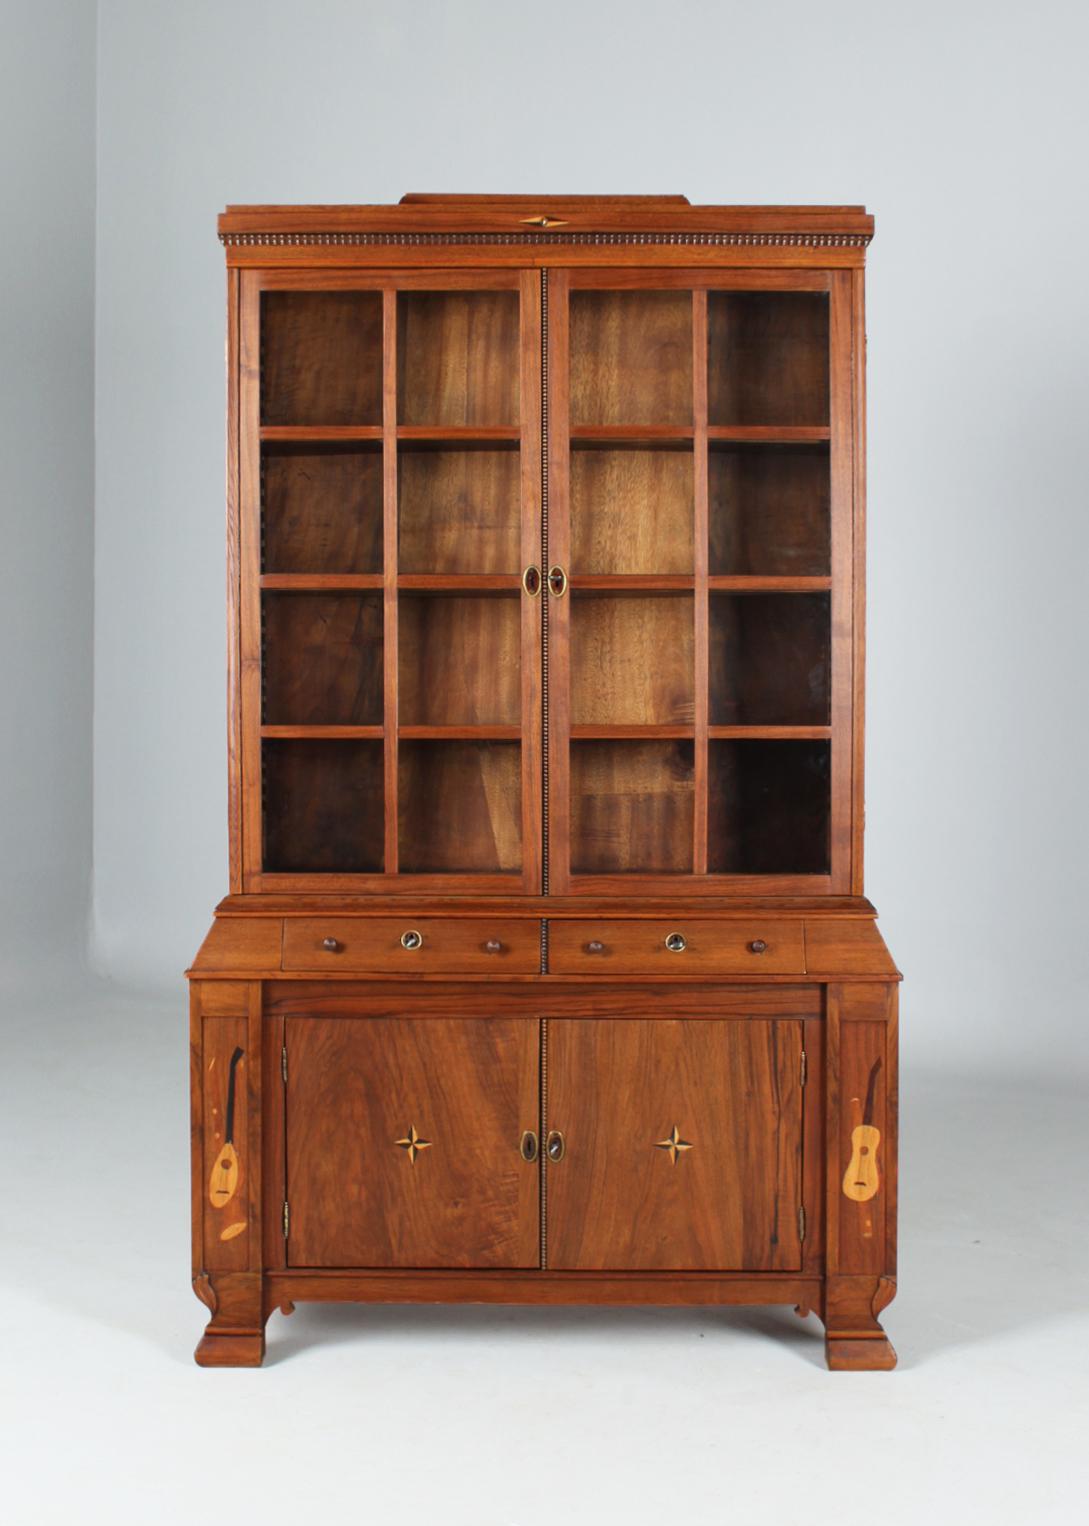 Small Art Deco display cabinet with marquetry

Germany
Walnut
Art Deco around 1920

Dimensions: H x W x D: 169 x 100 x 34 cm

Description:
Very rare and extremely delicate bookcase from the German Art Deco.

The two-door base is decorated